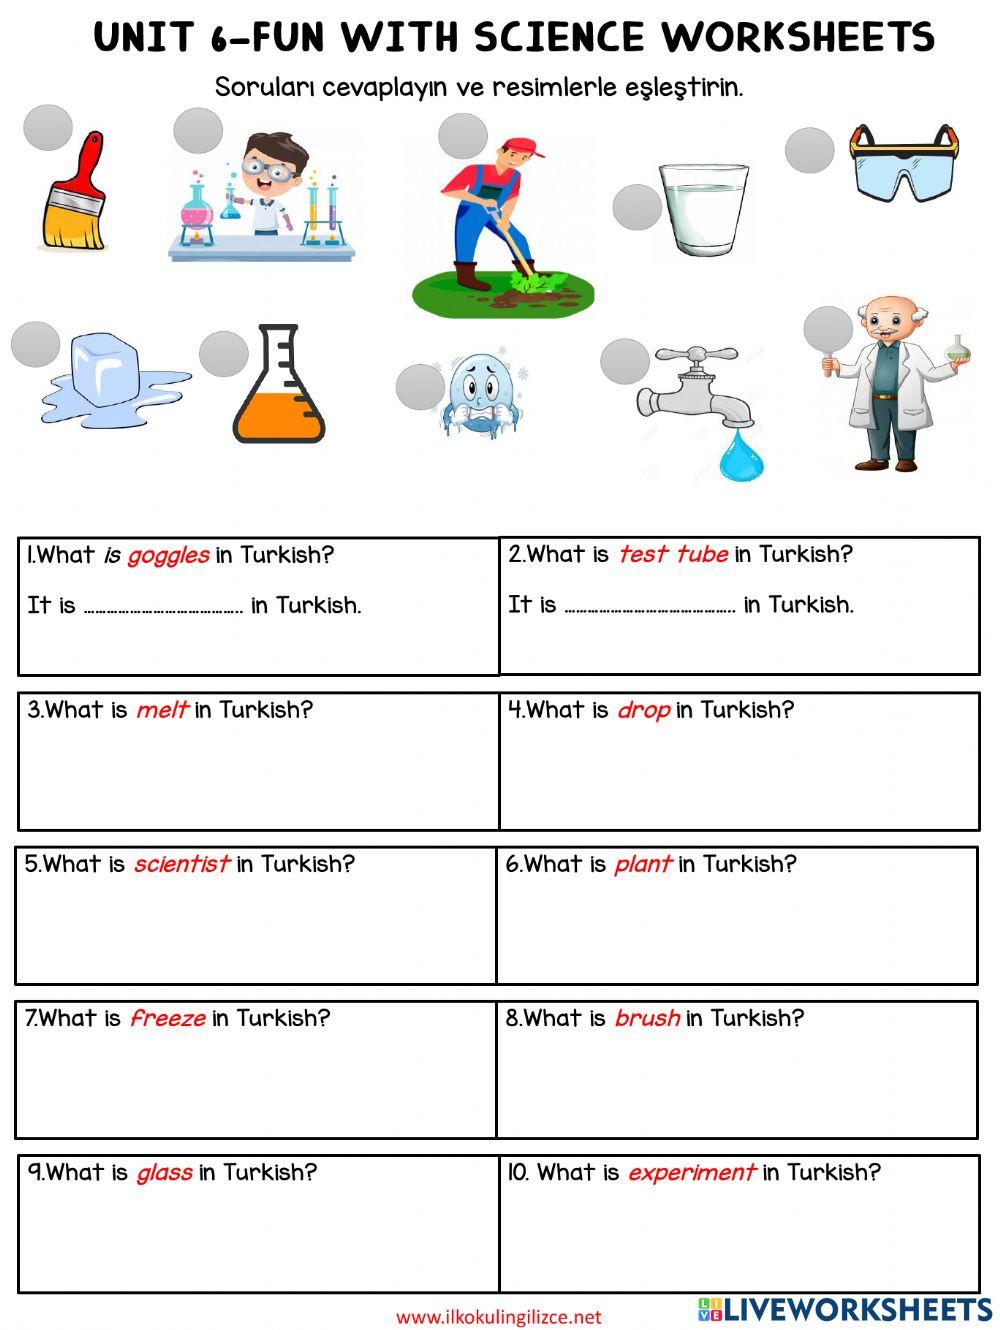 4.6 Fun with Science Worksheets